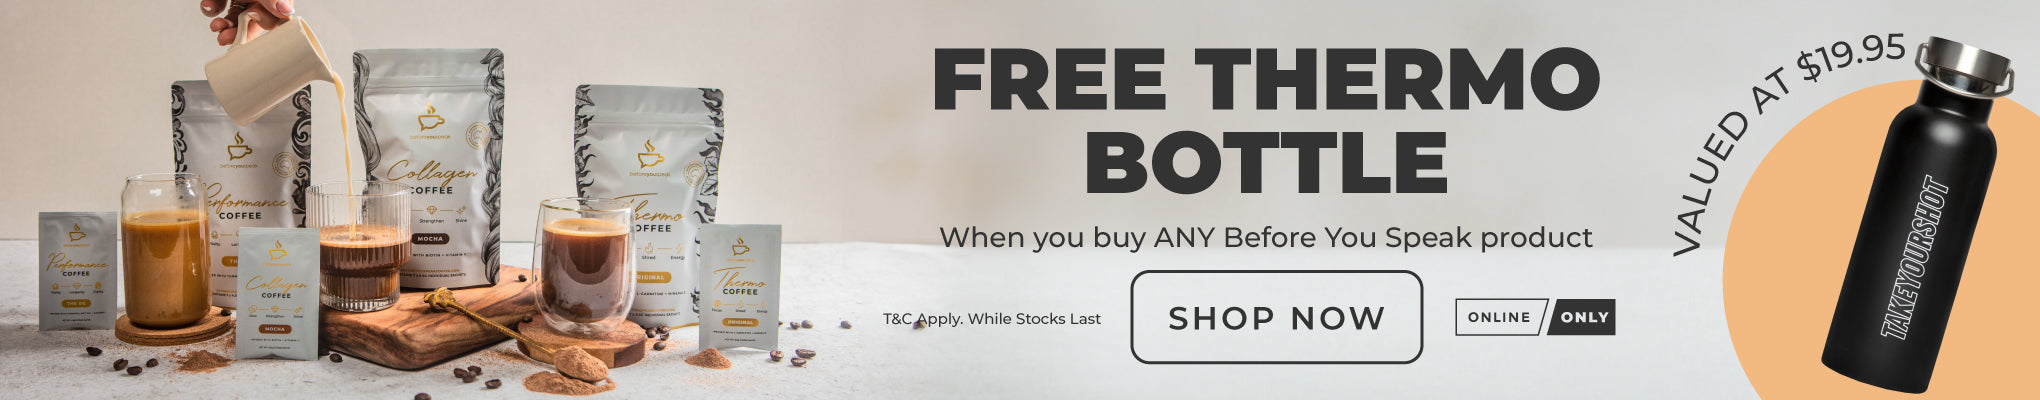 BYS Online Only Deal - Buy any BYS product